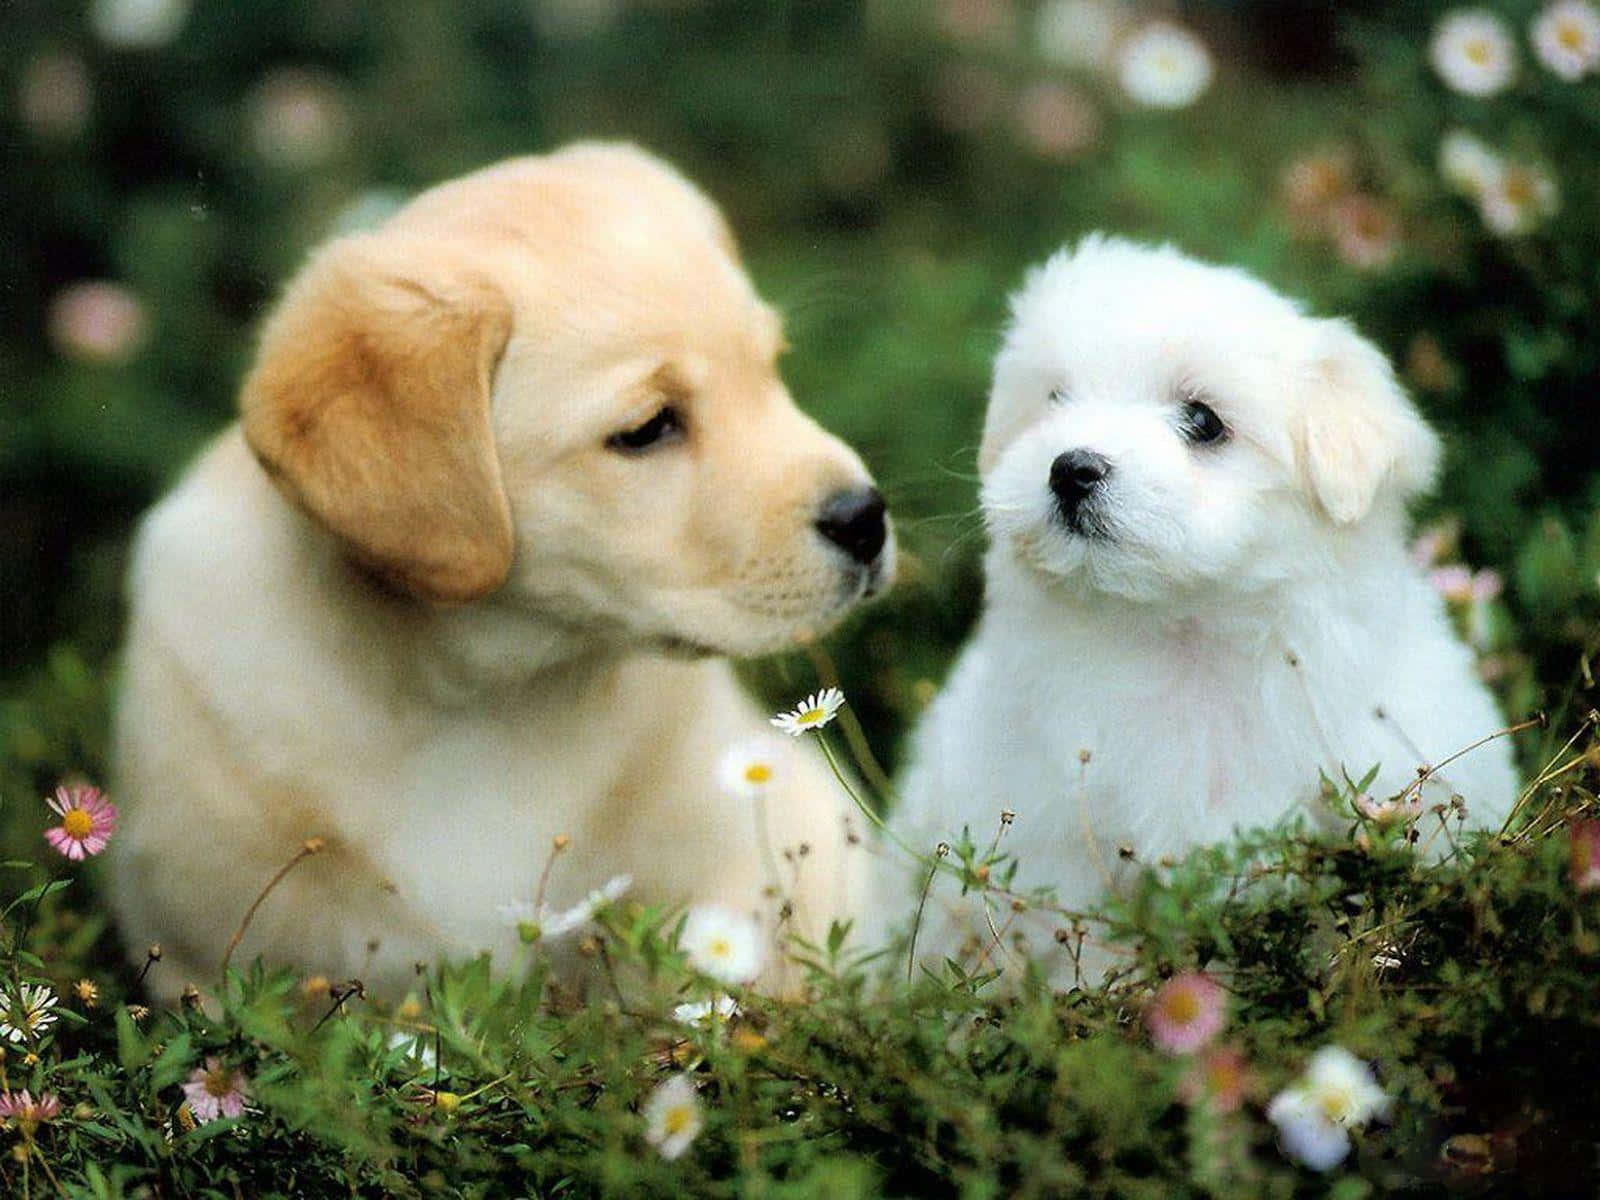 Two Puppies Sitting In The Grass